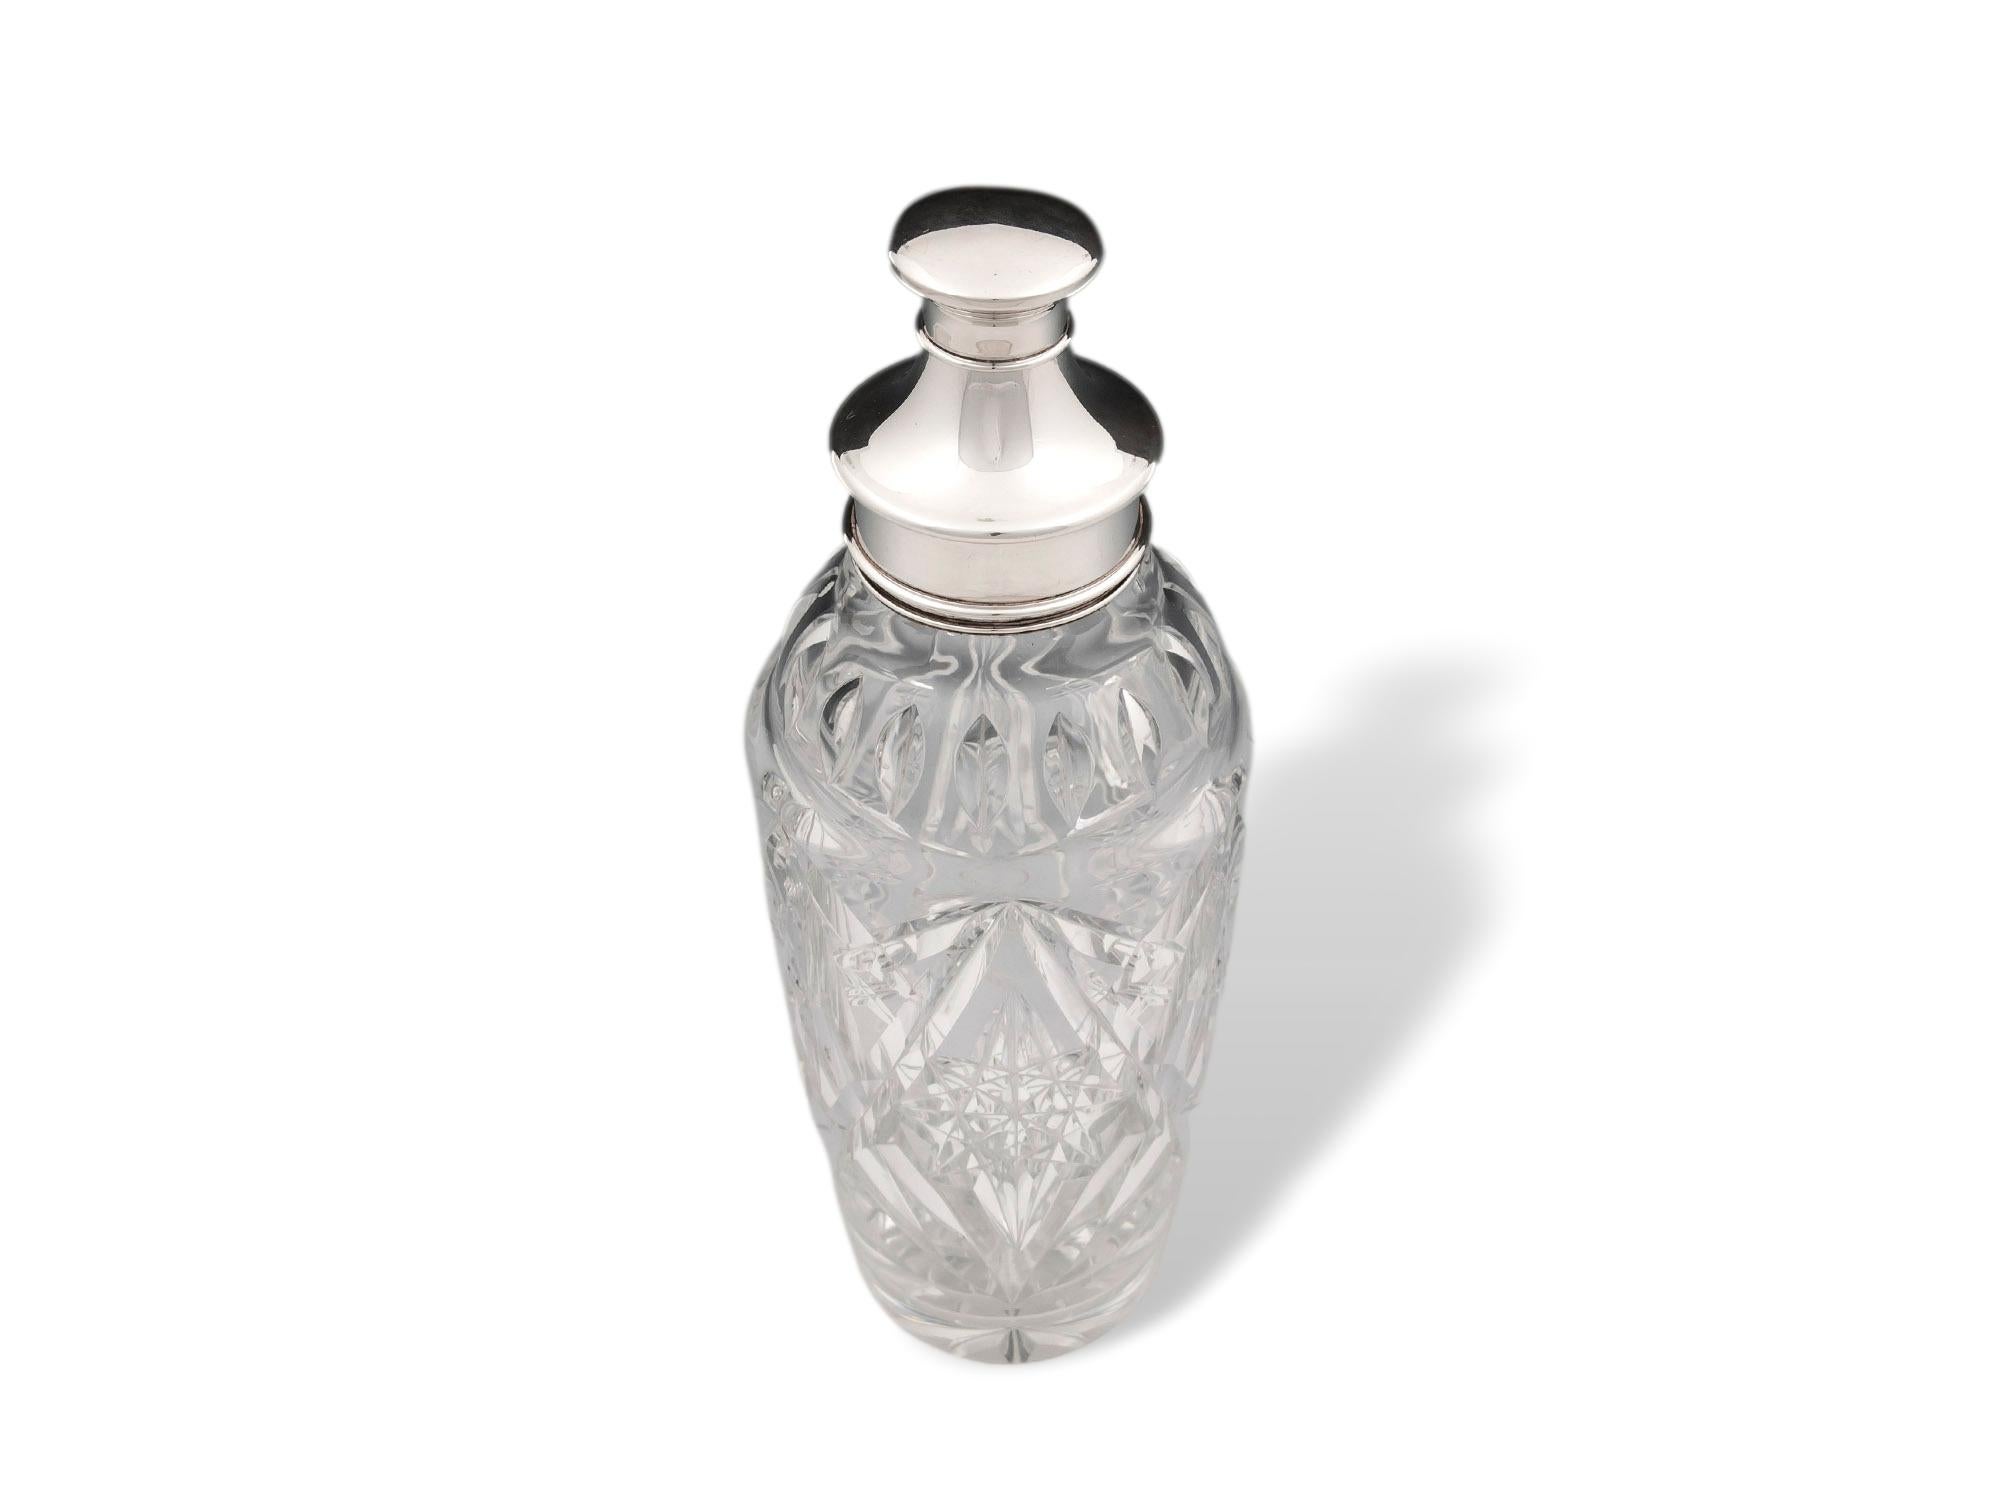 From the Art Deco Period Dated 1930

From our Barware collection, we are delighted to offer this Art Deco Silver & Glass Cocktail Shaker. The Cocktail Shaker of long oval form with a tapered hand-cut clear glass body of good weight featuring a